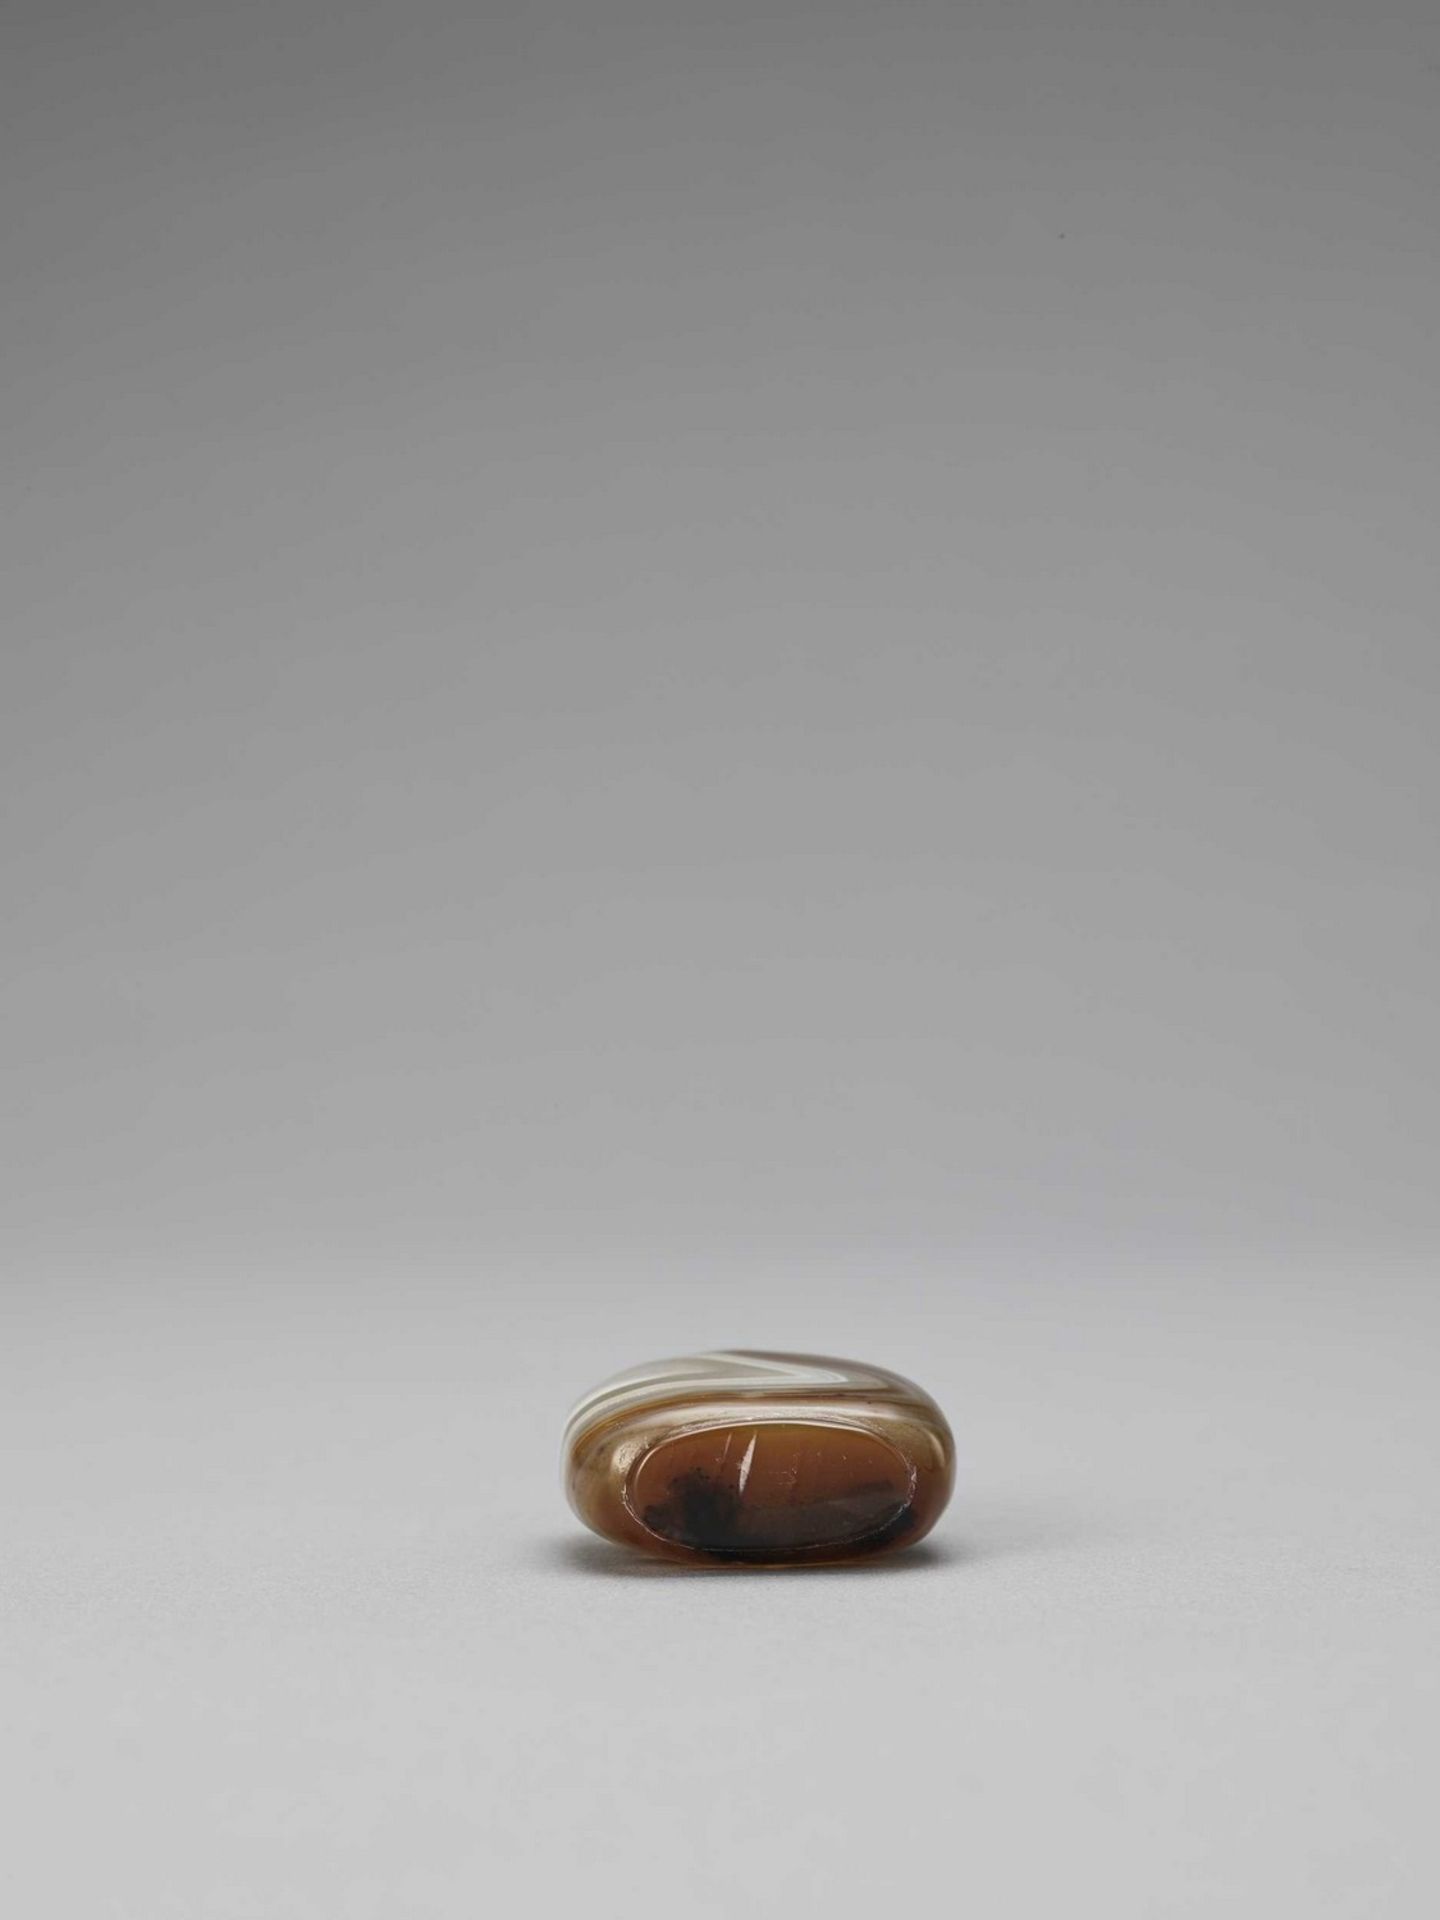 A BANDED AGATE SNUFF BOTTLE, LATE QING TO REPUBLIC - Image 6 of 6